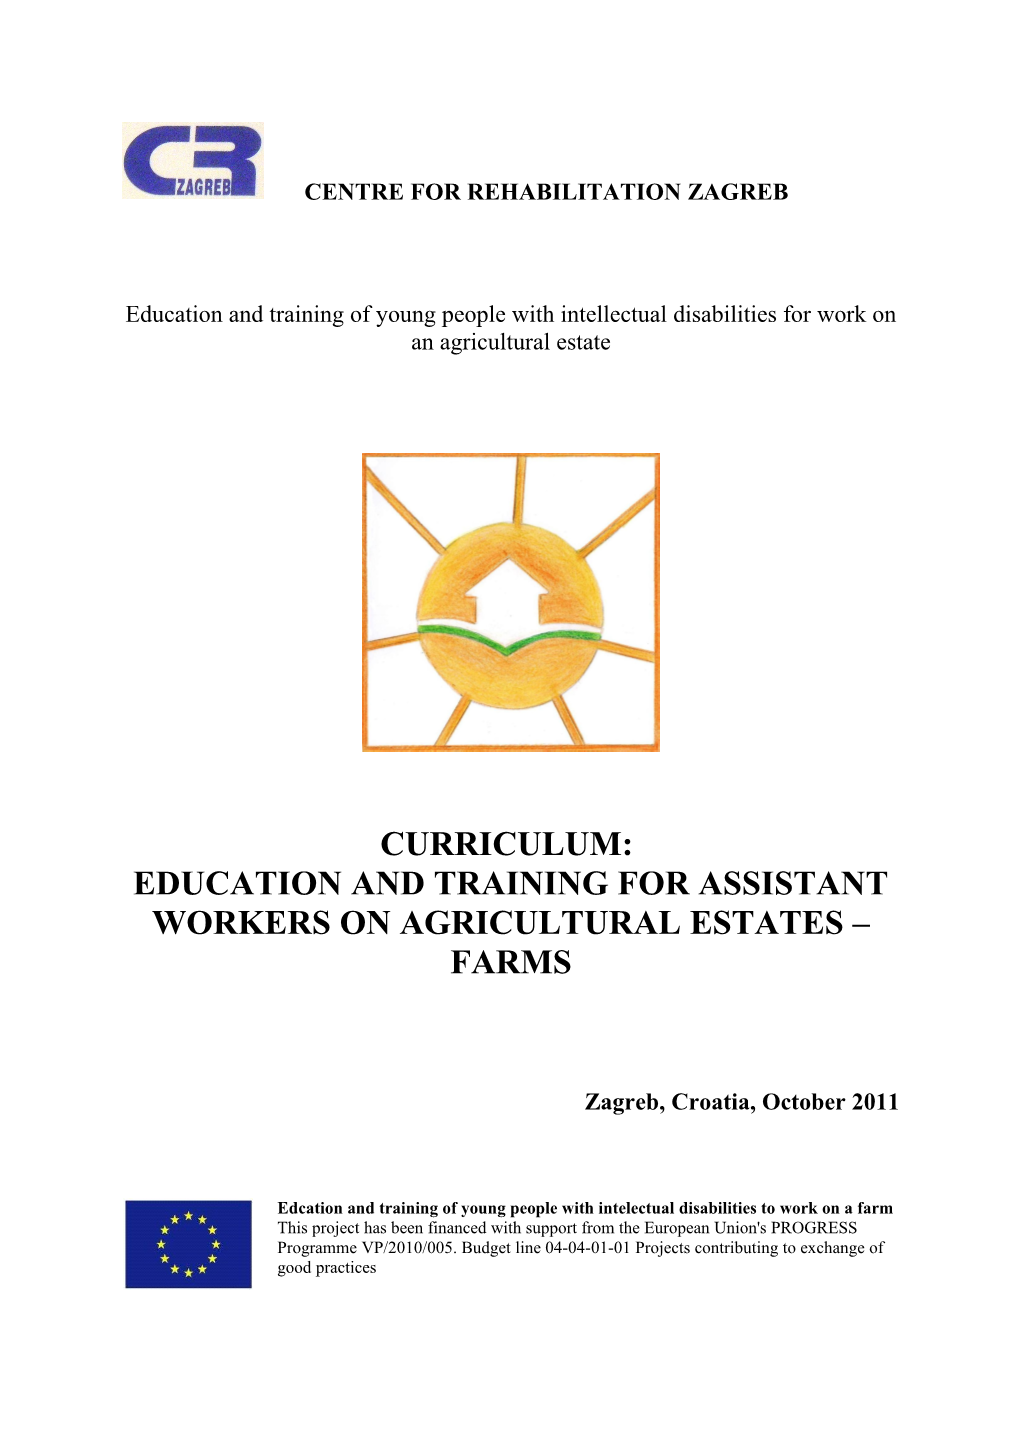 Education and Training for Assistant Workers on Agricultural Estates Farms